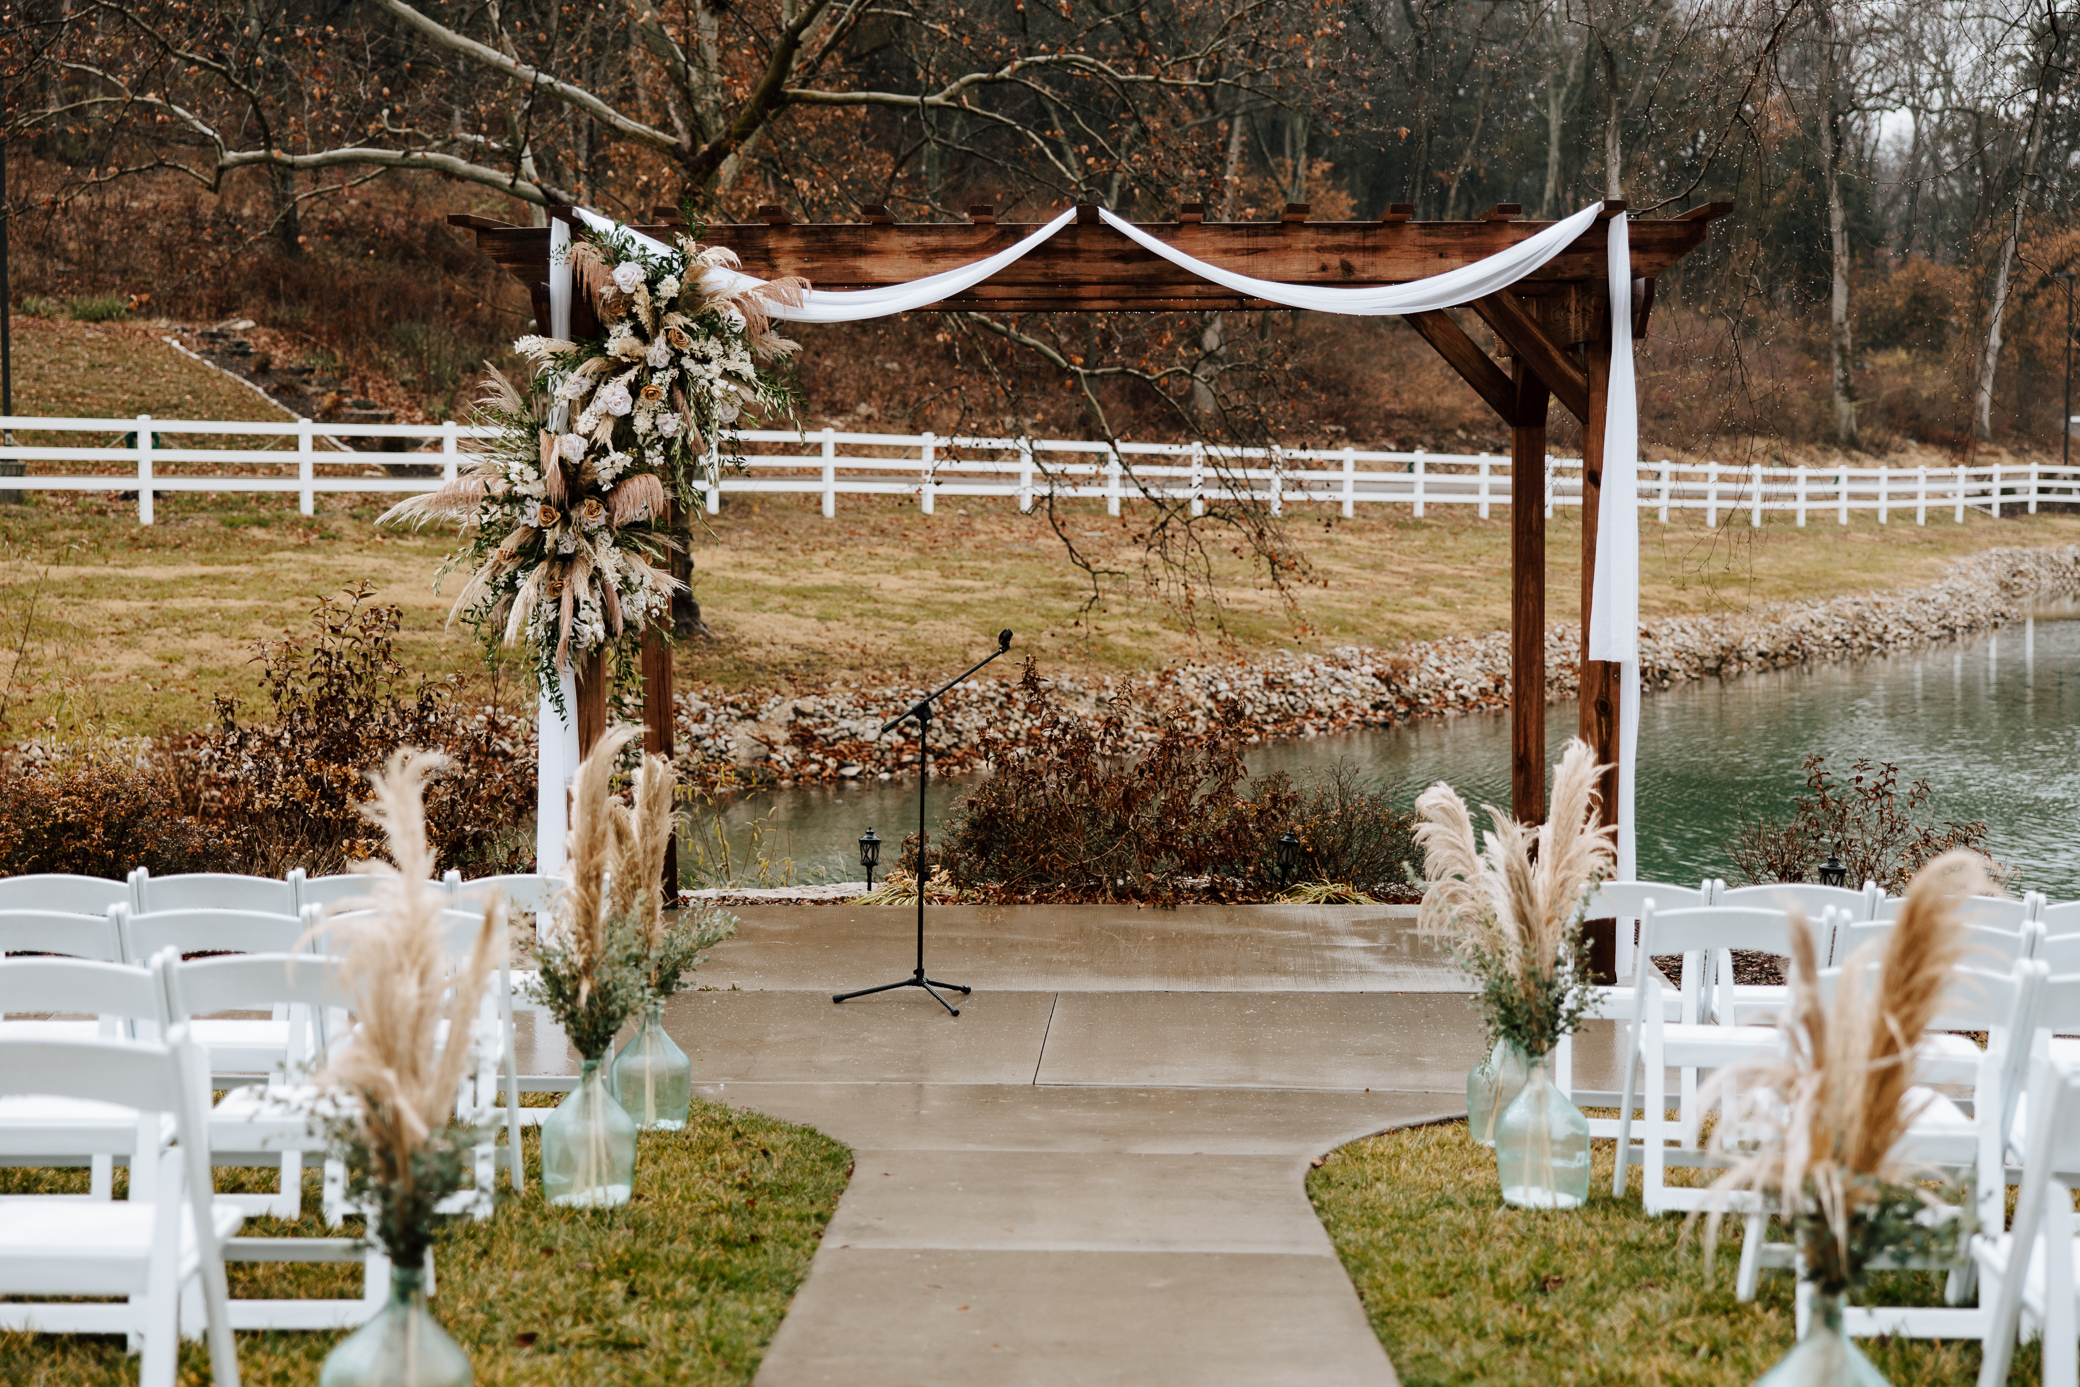 A view of the pergola arbor in the ceremony space at Knotting Hills in Pevely, Missouri. The pergola is adorned with white and brown florals with greenery and pampas grass and features a white cloth draped over the top of the arbor.